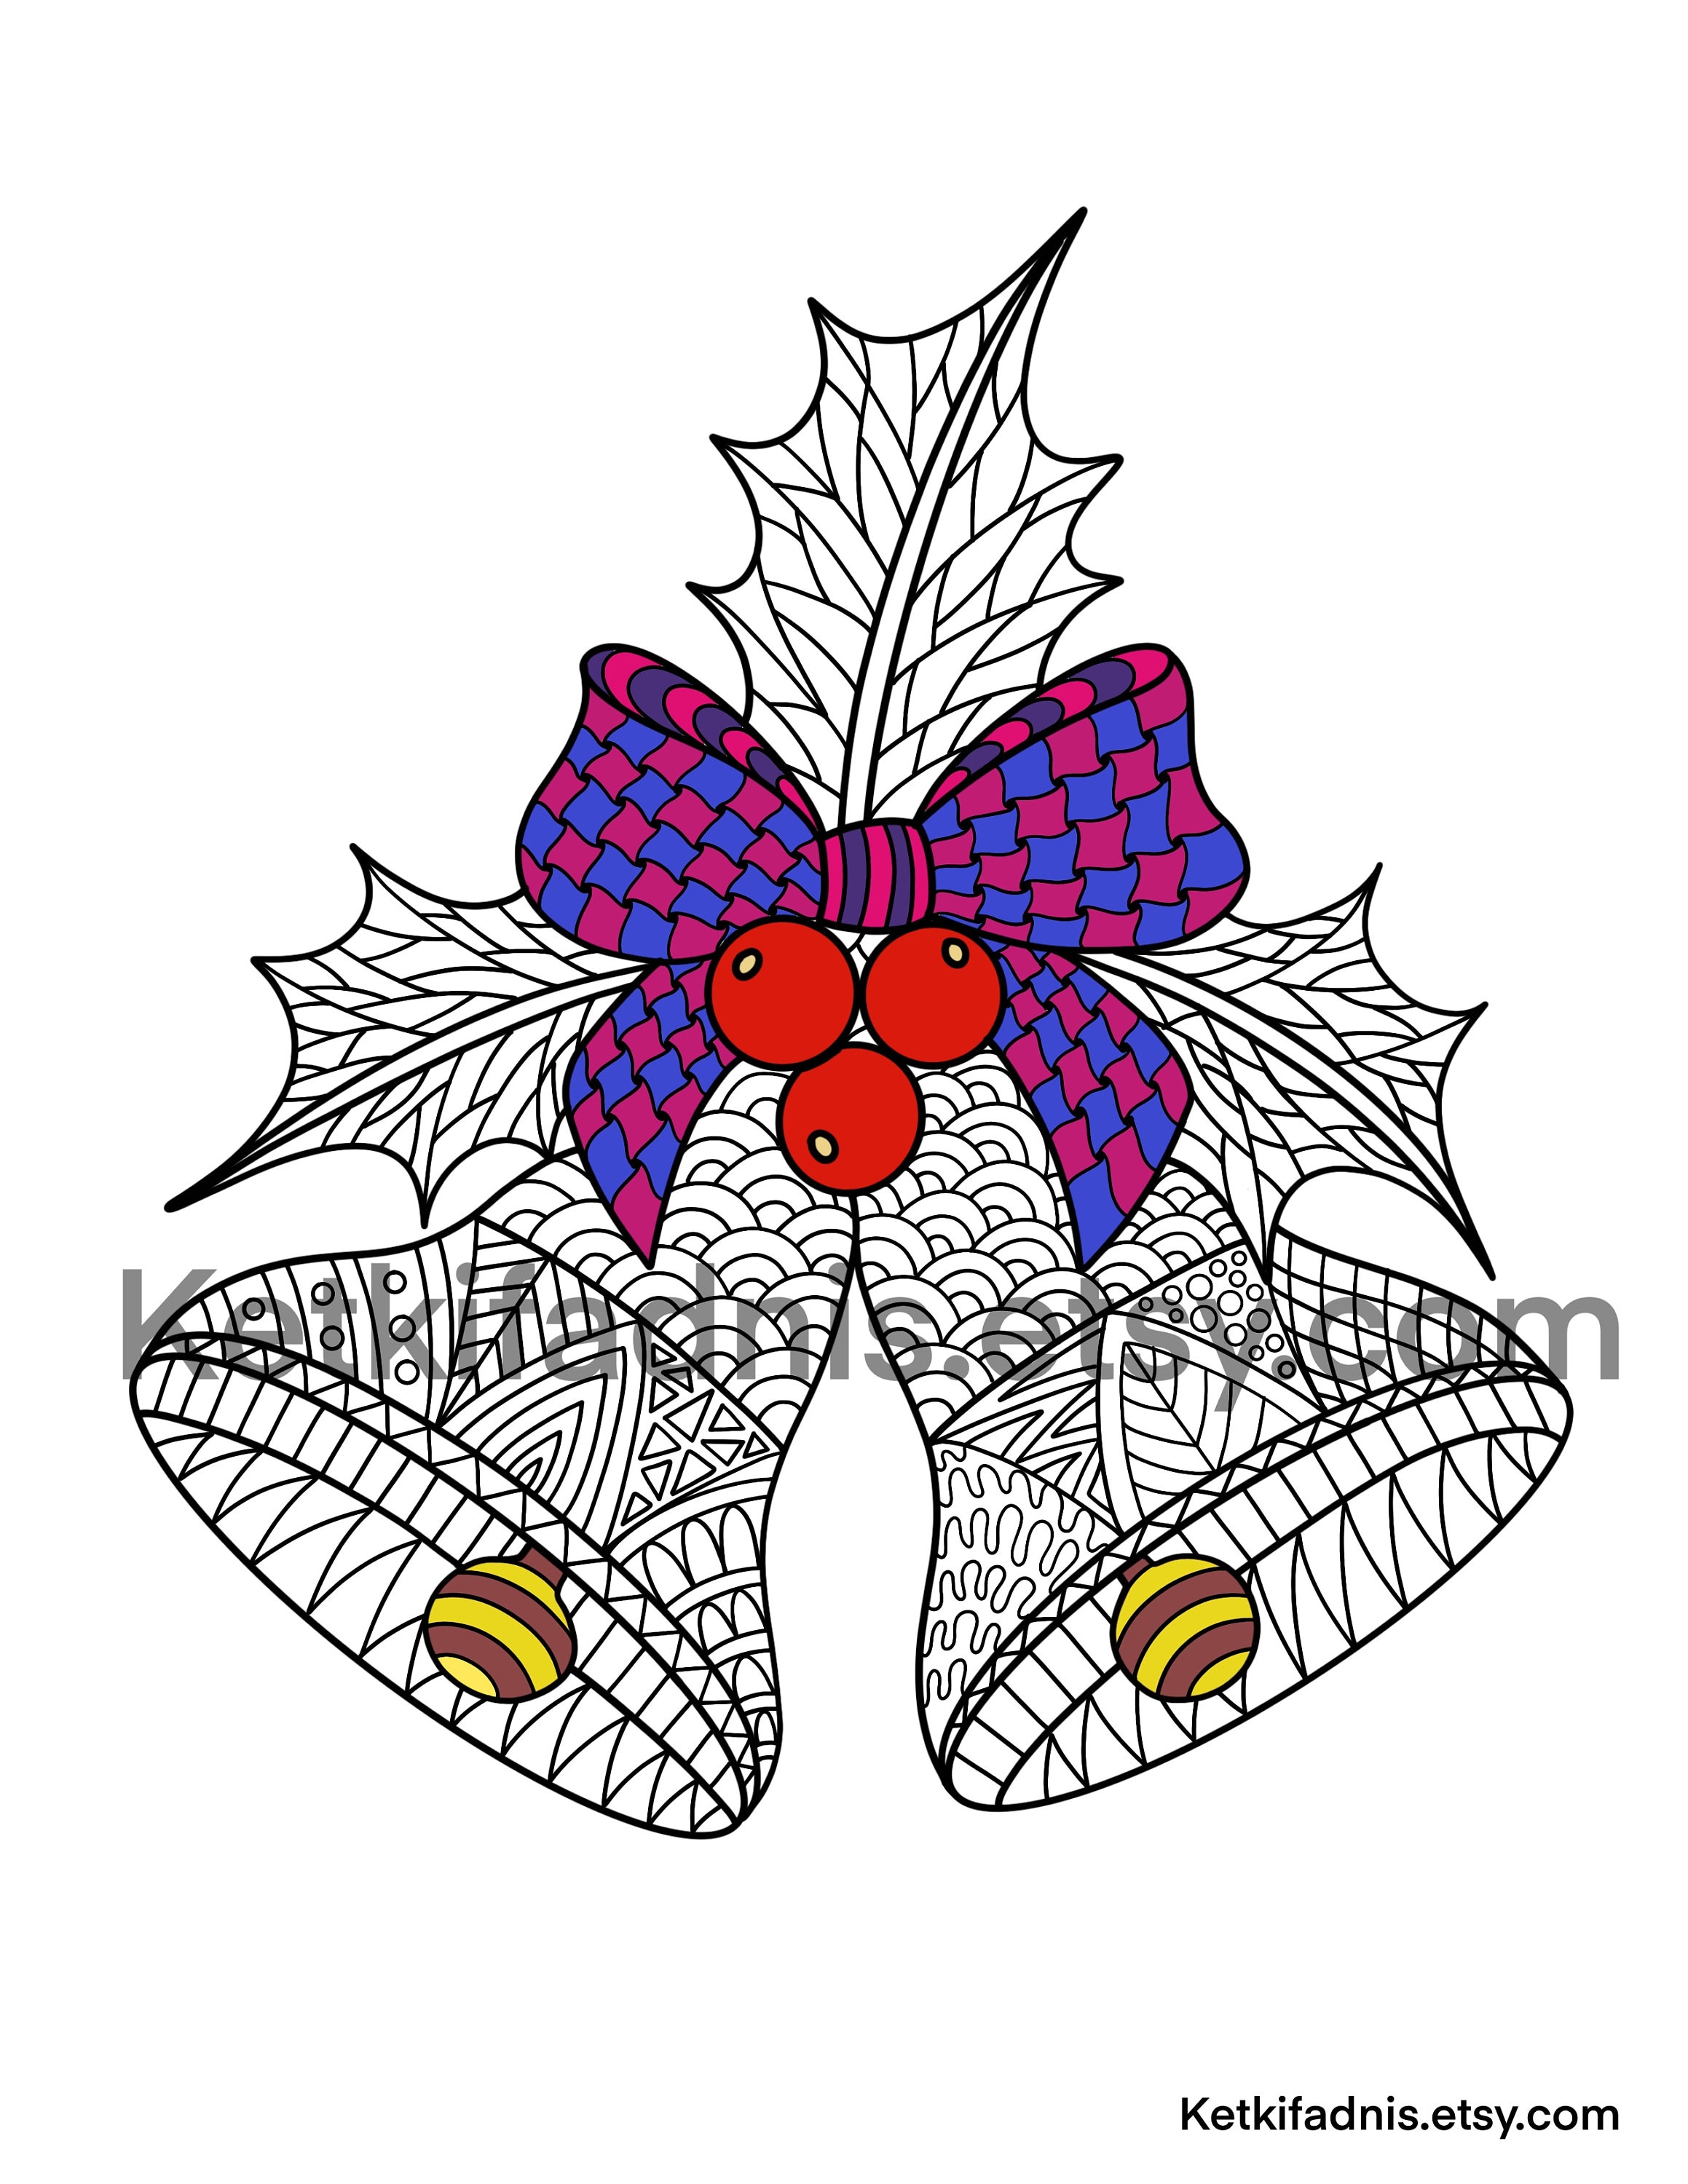 christmas bell coloring pages